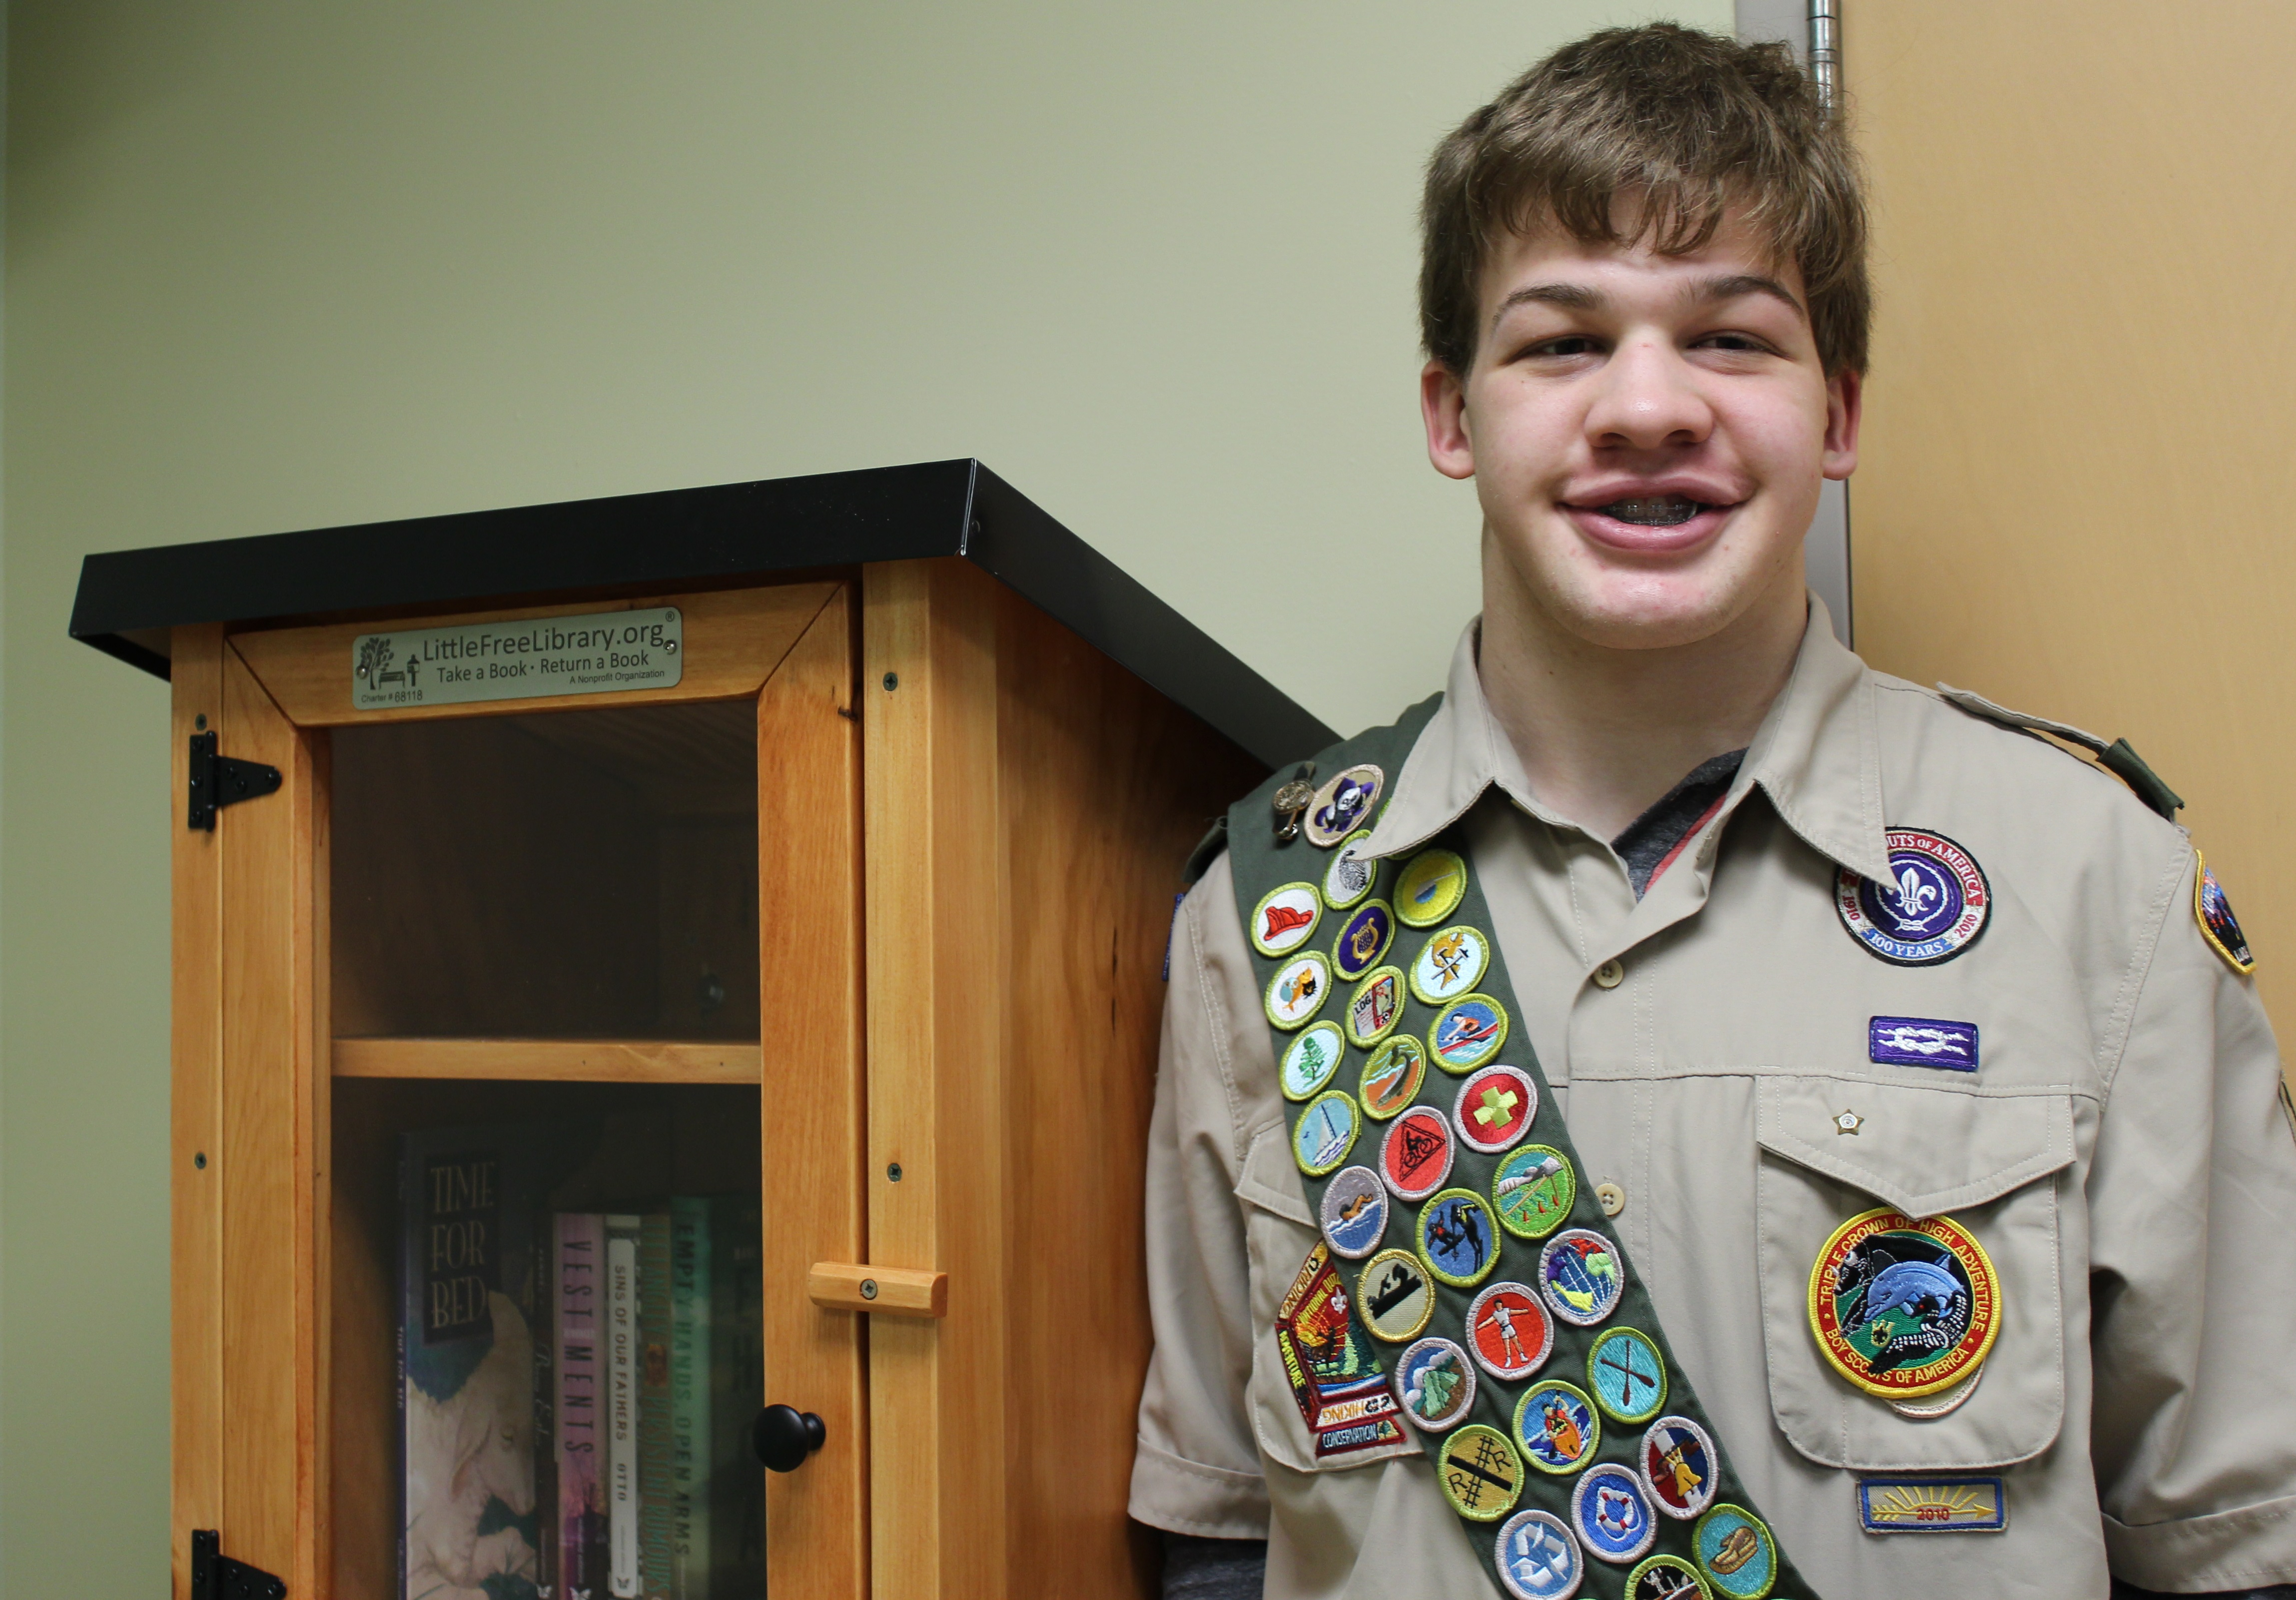 Michael Siebert donated two Little Free Libraries to waiting rooms at UofL Hospital as part of an Eagle Scout project.